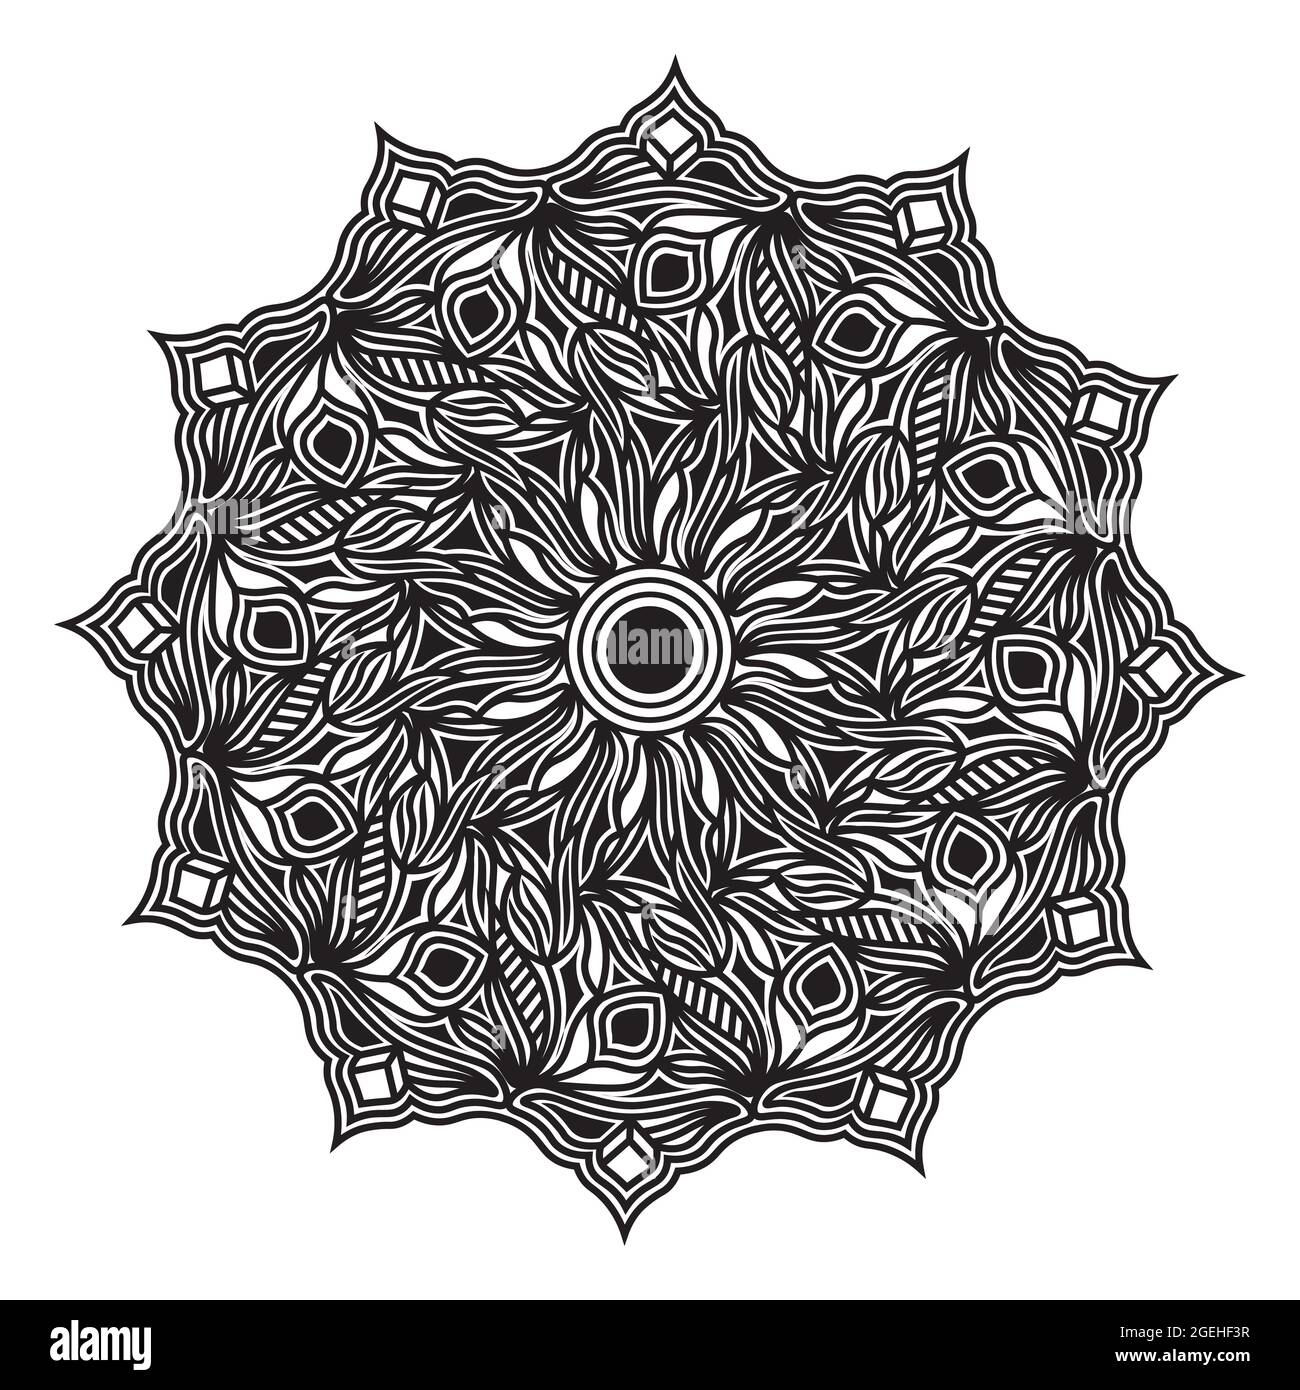 mandala relaxing adult creative mystical decorative floral meditation design of graphic element background Stock Vector